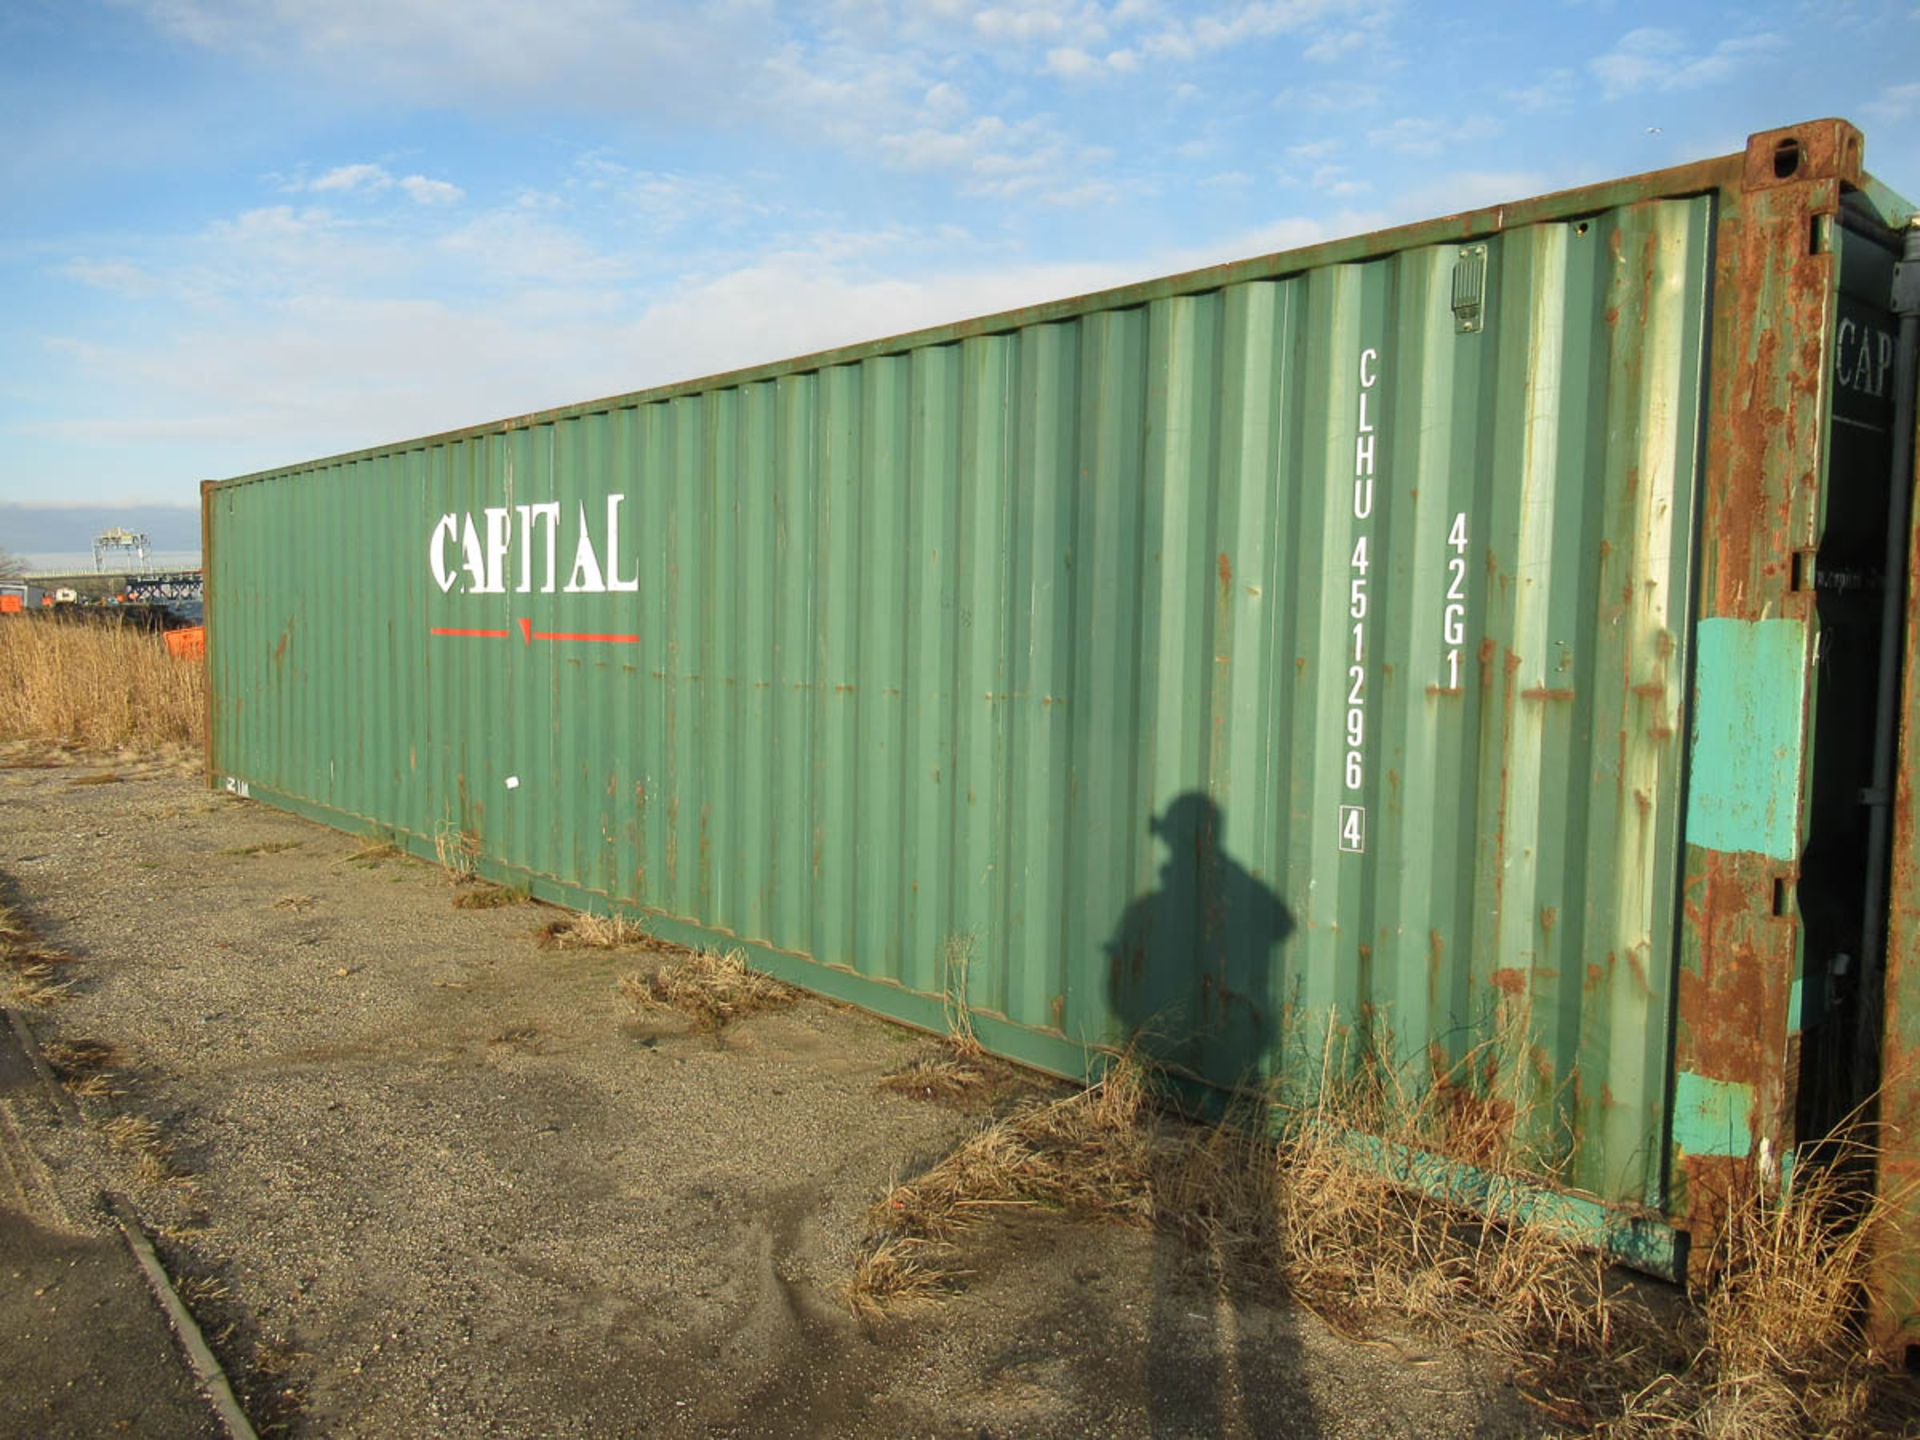 40' YANG ZHOU TYPE CL401/03 CONTAINER (2003) [LOCATED @ MARINE PARKWAY BRIDGE - QUEENS SIDE]